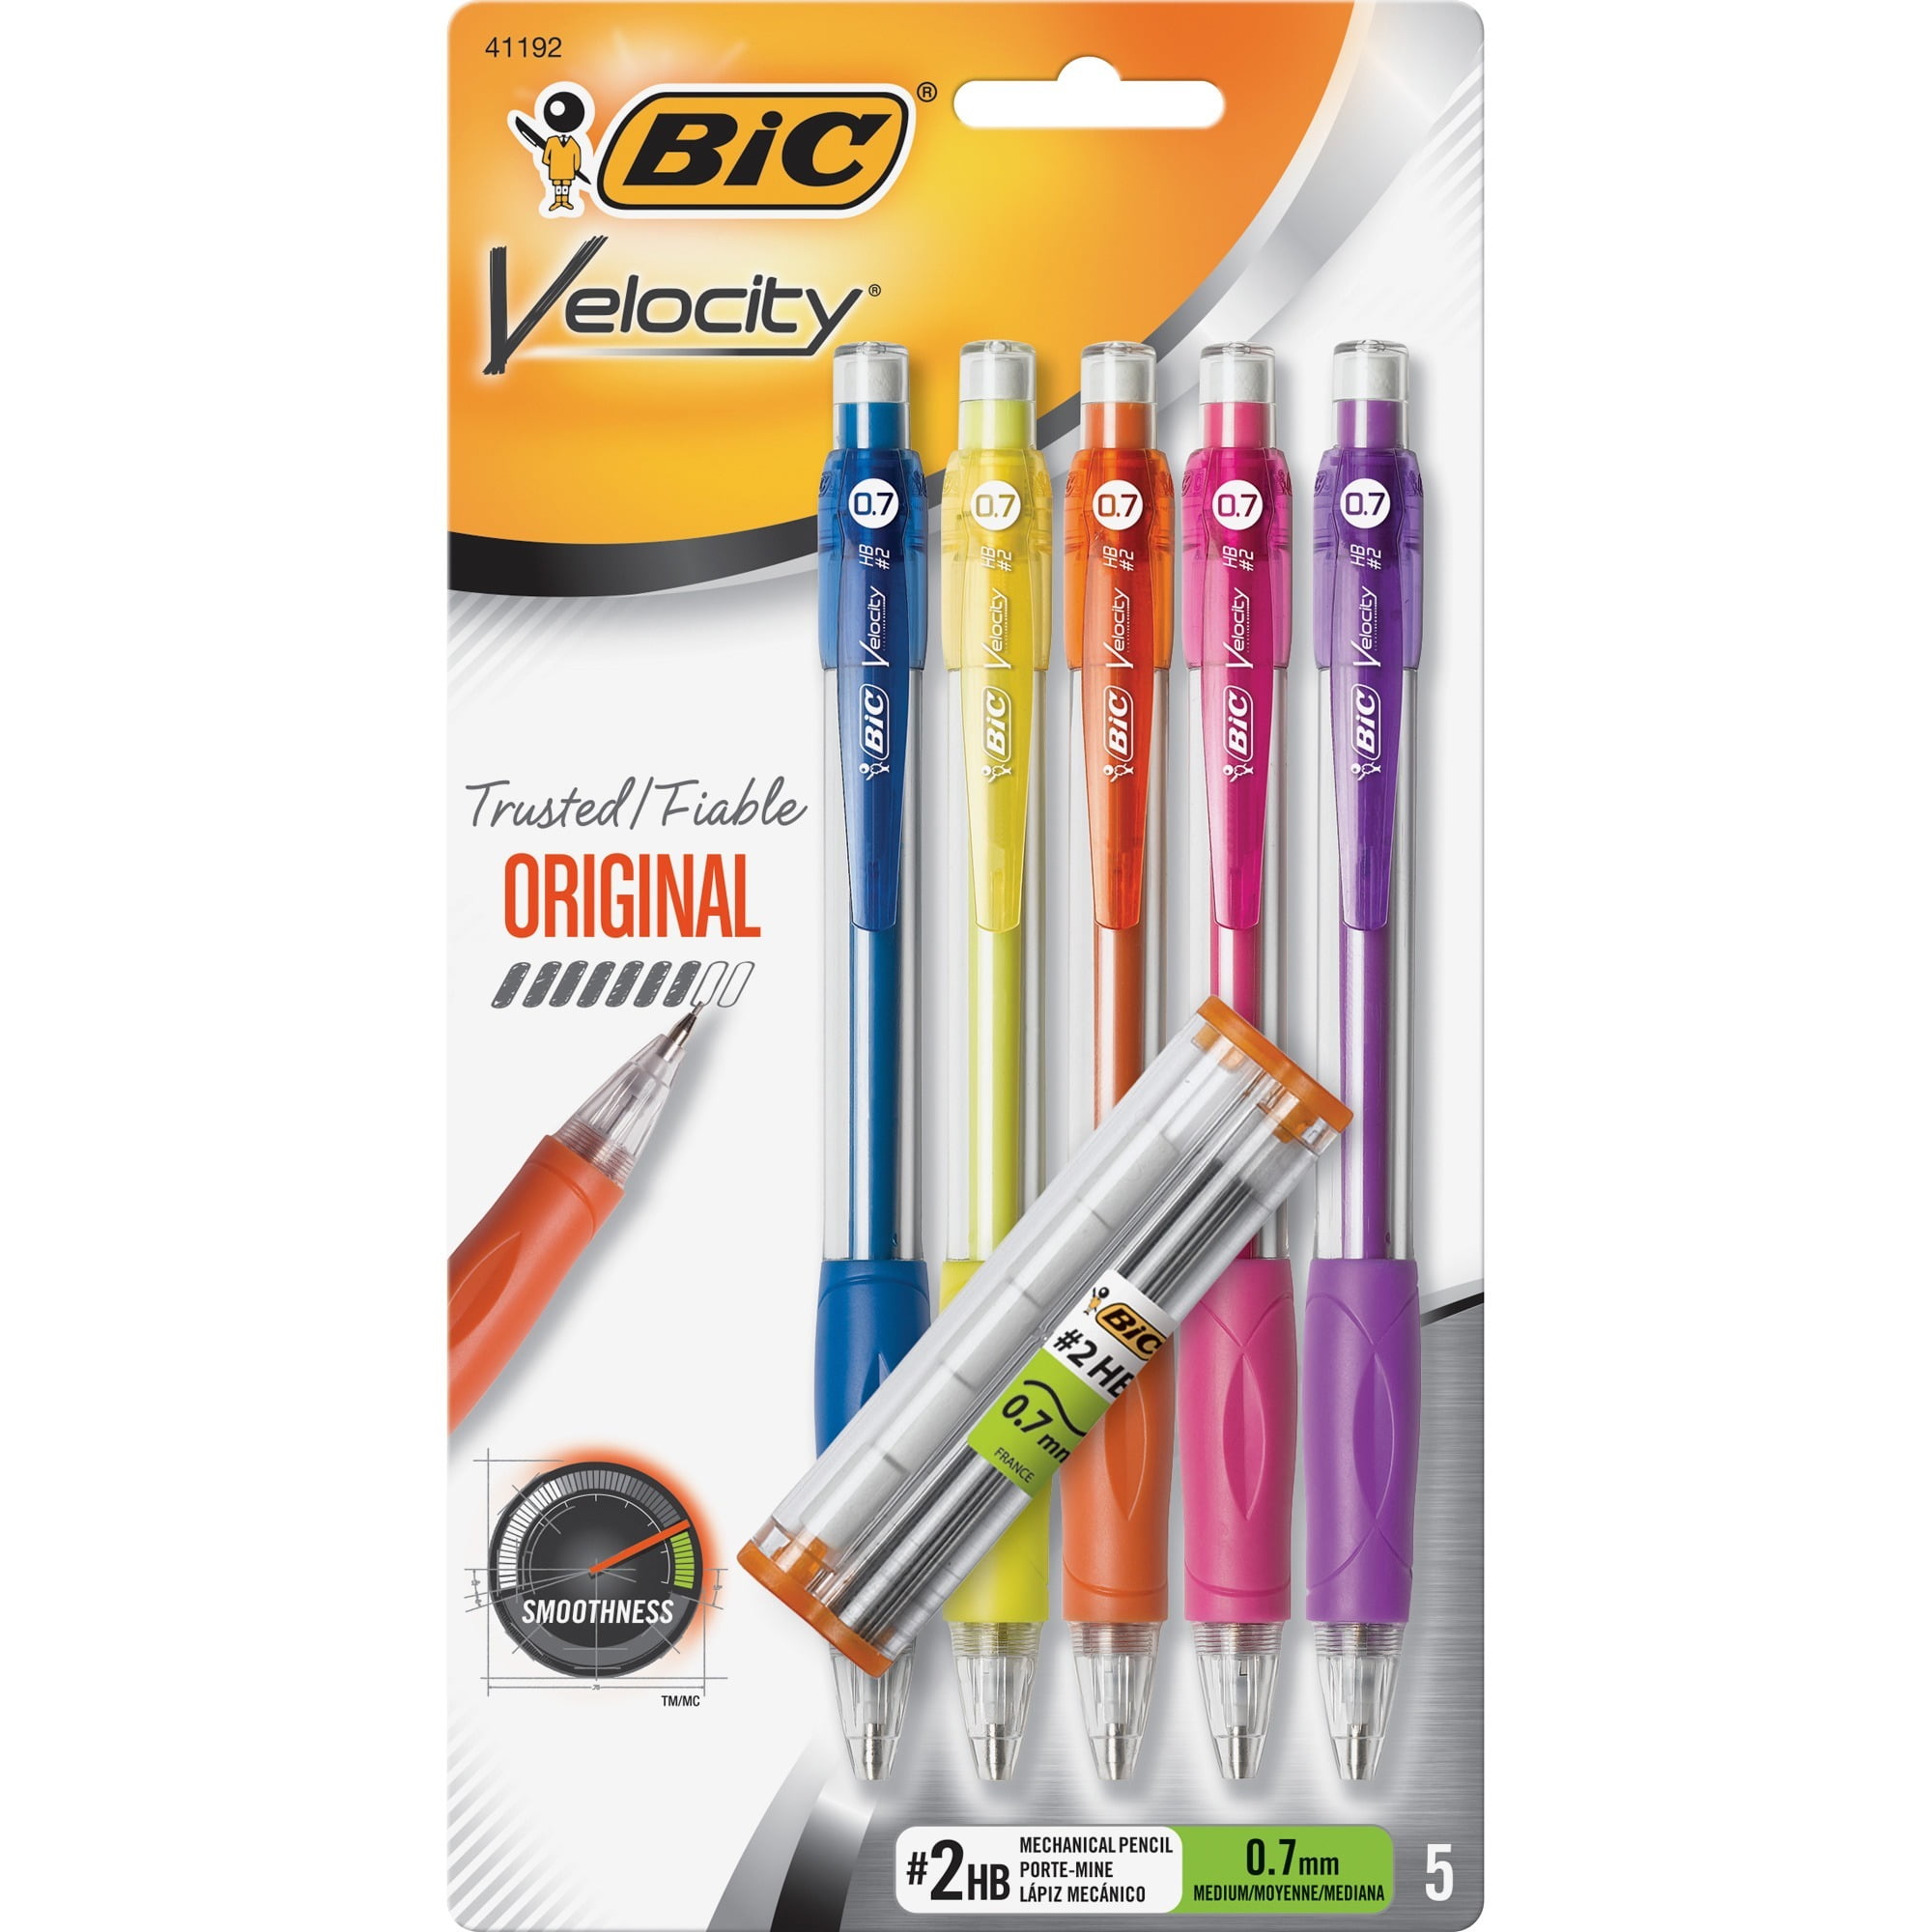 NEW in PACKAGE with FREE SHIPPING BIC Velocity Mechanical Pencil Pack Of 2 70330411708 